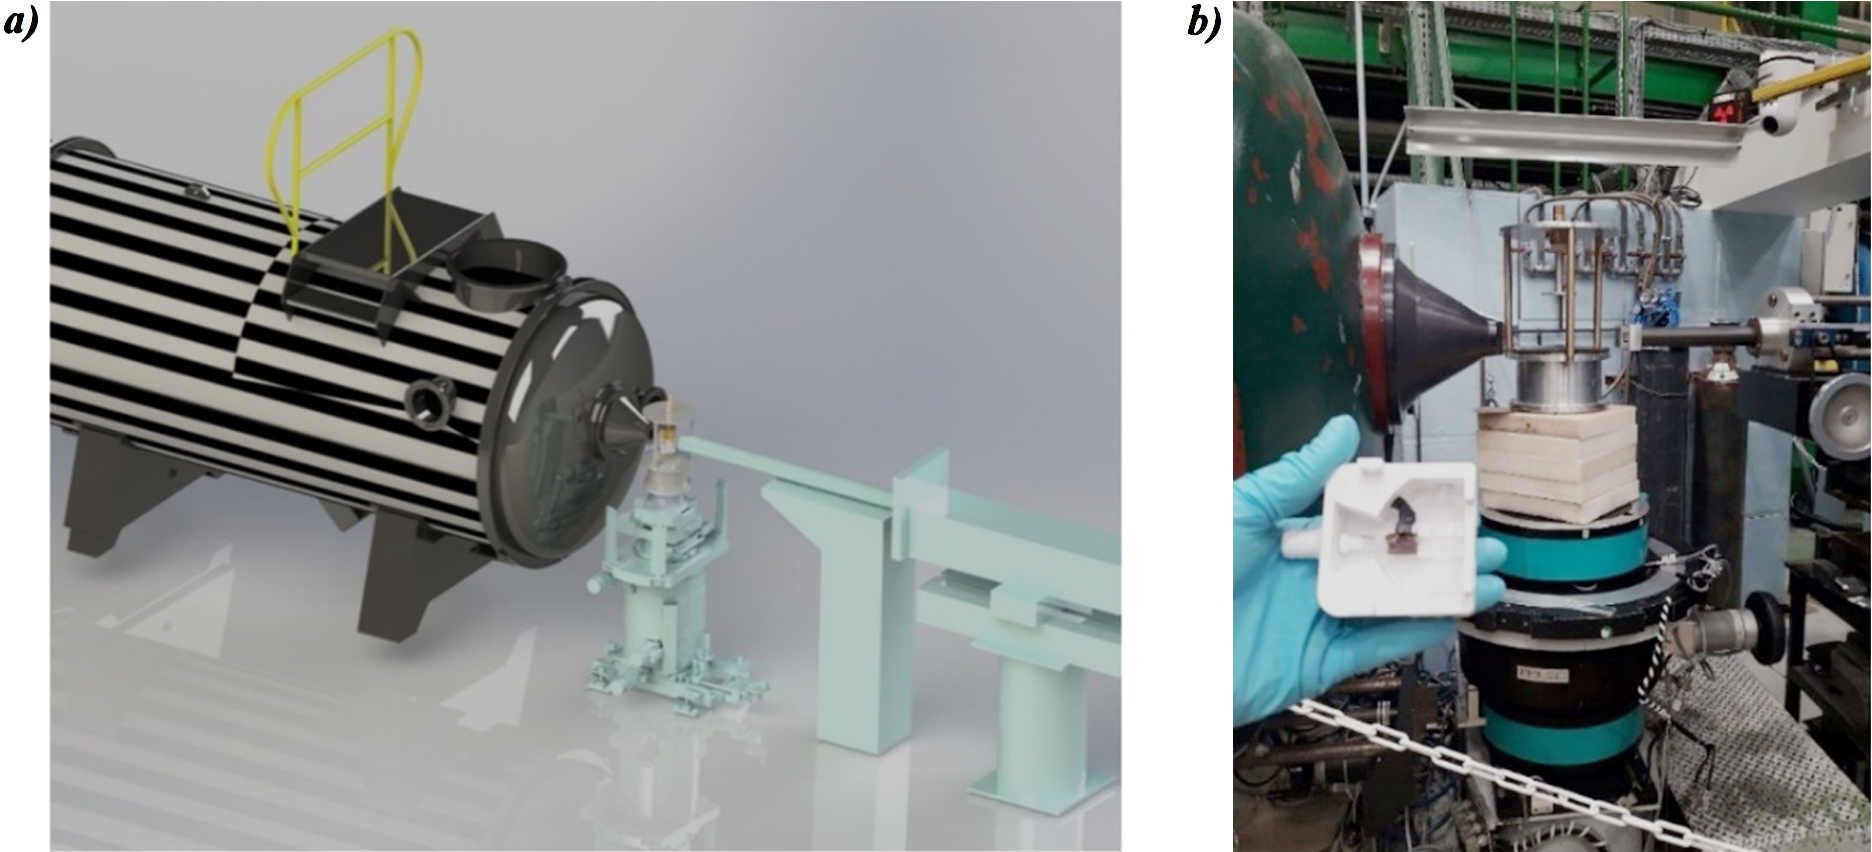 a) 3D model of the LLB SANS instrument PAXY. From right to left, the neutron guide (in turquoise blue), the one sided-NMR spectrometer (at the center of the picture on a) and b)) and the neutron detector box (zebra) are shown. b) Real picture of the central part modelized in a). The NMR magnet is seen in the middle of the picture and the NMR-neutron probehead is shown at the forefront. The copper NMR coil surrounding the Hellma® cell is set in place. The NMR console (not shown) was 2 meters away from the sample position.